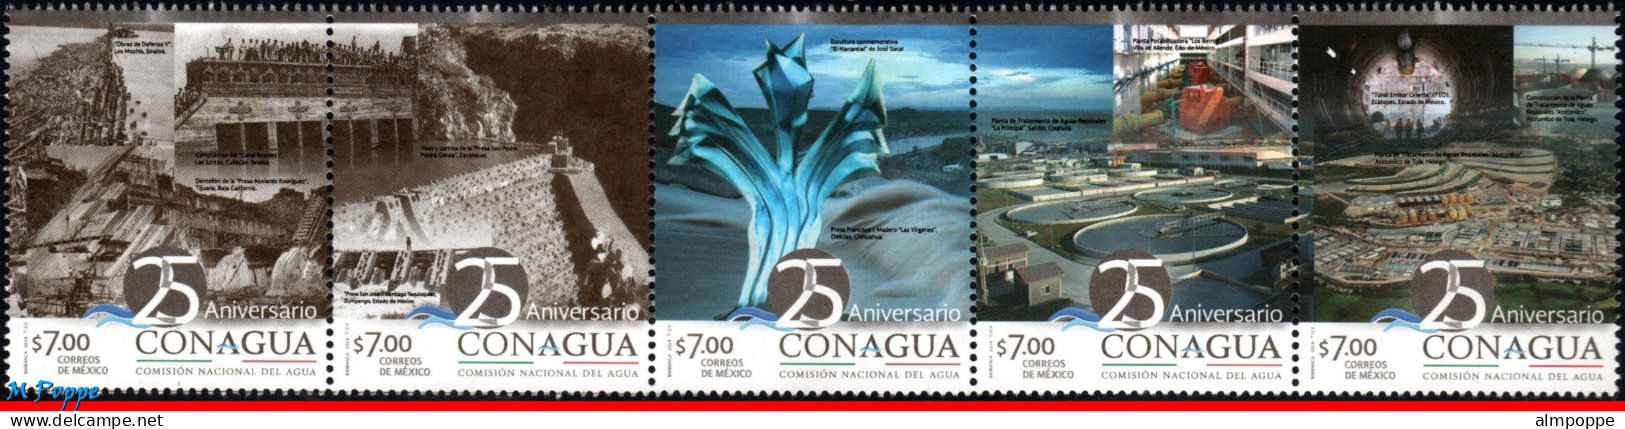 Ref. MX-2859 MEXICO 2014 - CONAGUA, 25TH ANNIV., NTLWATER COMMISSION, WATER DAMS, SET MNH, INDUSTRY 5V Sc# 2859 - Wasser